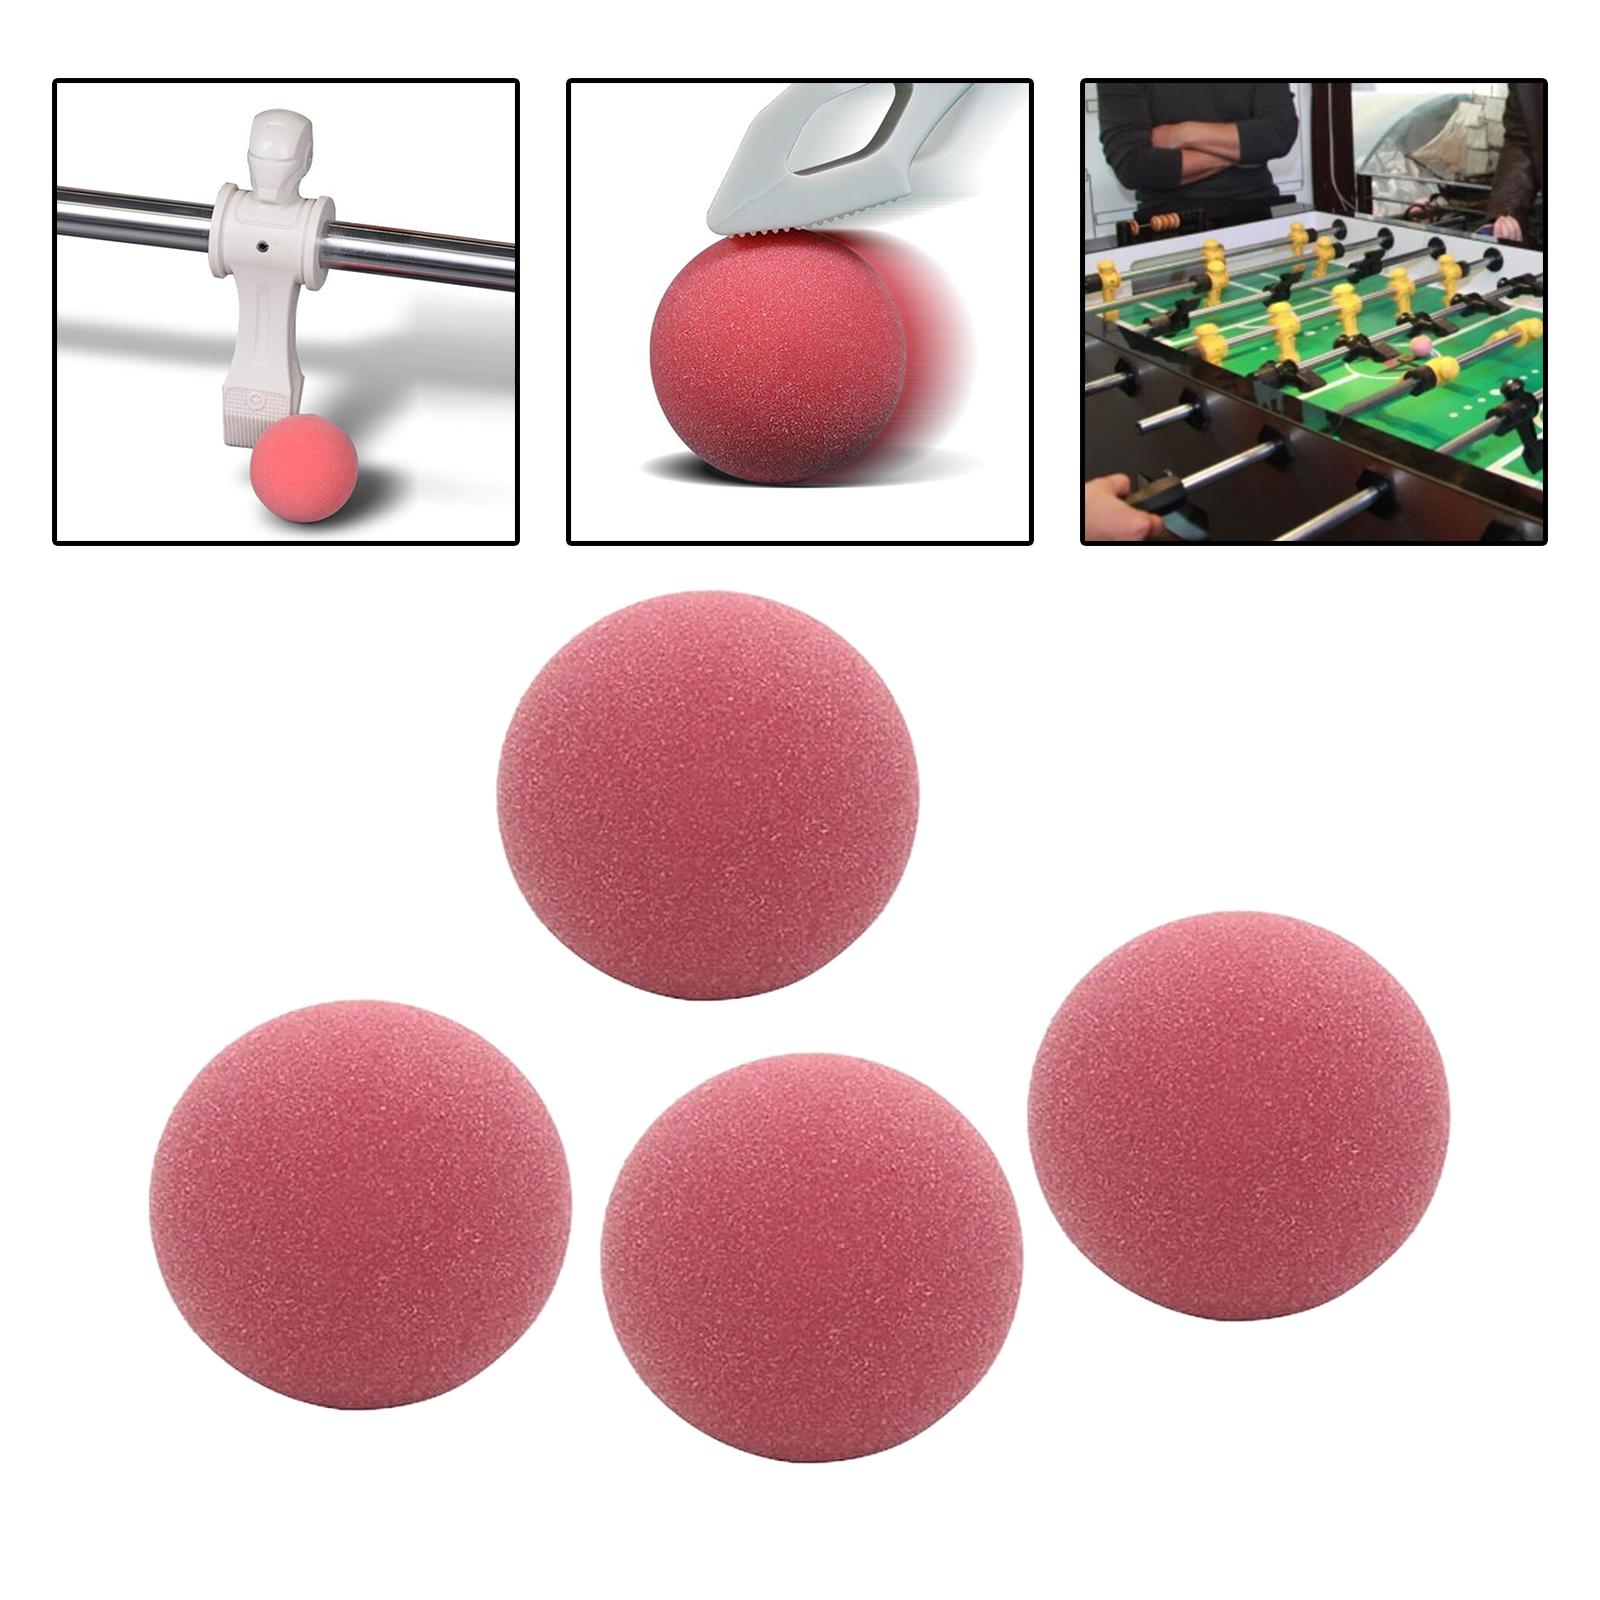 4 Pieces Foosball Balls Replacements Official Tournament Table Soccer Balls